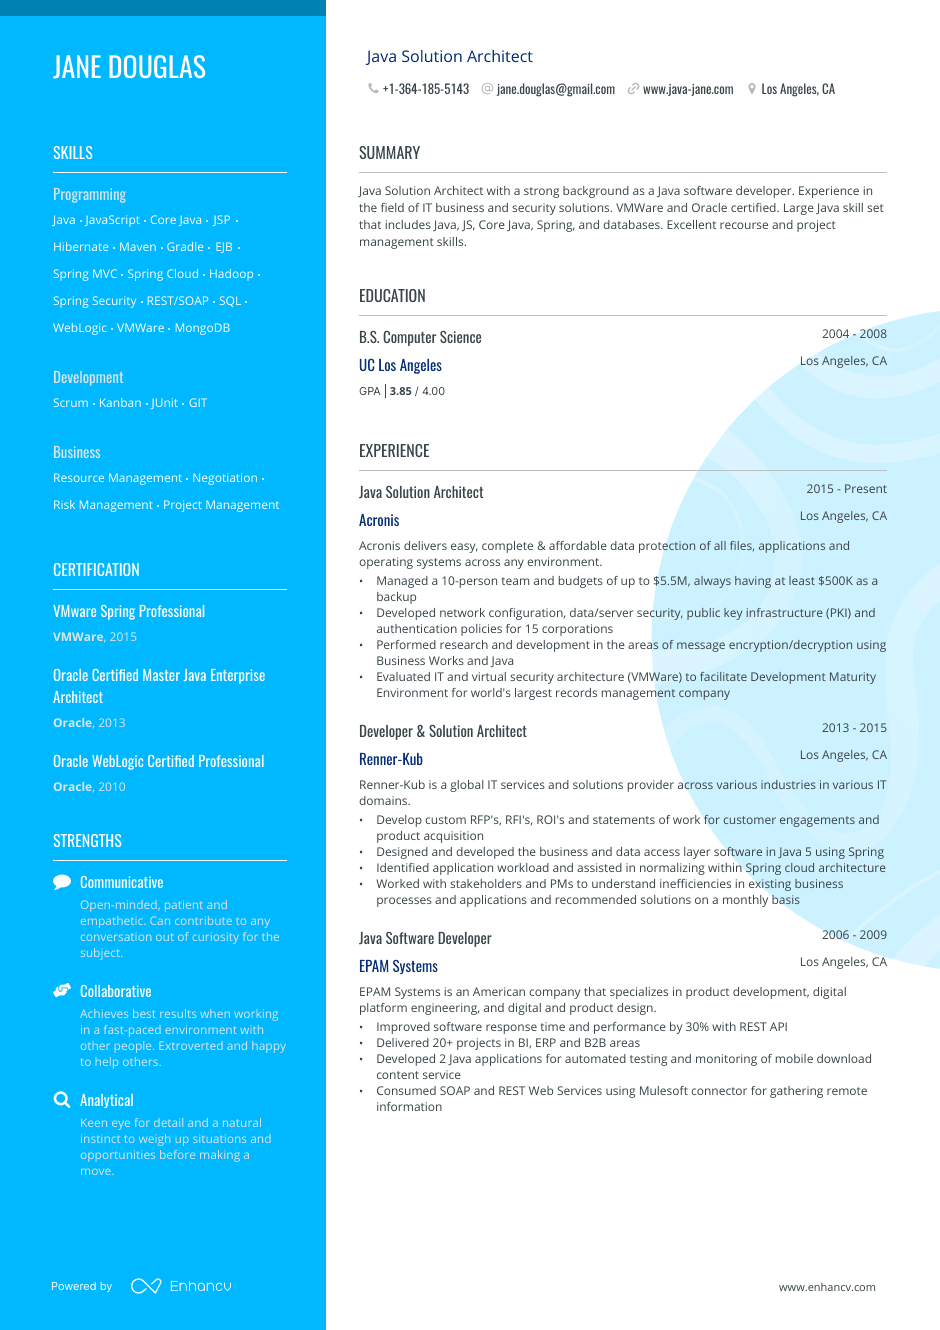 Java solutions architect resume example